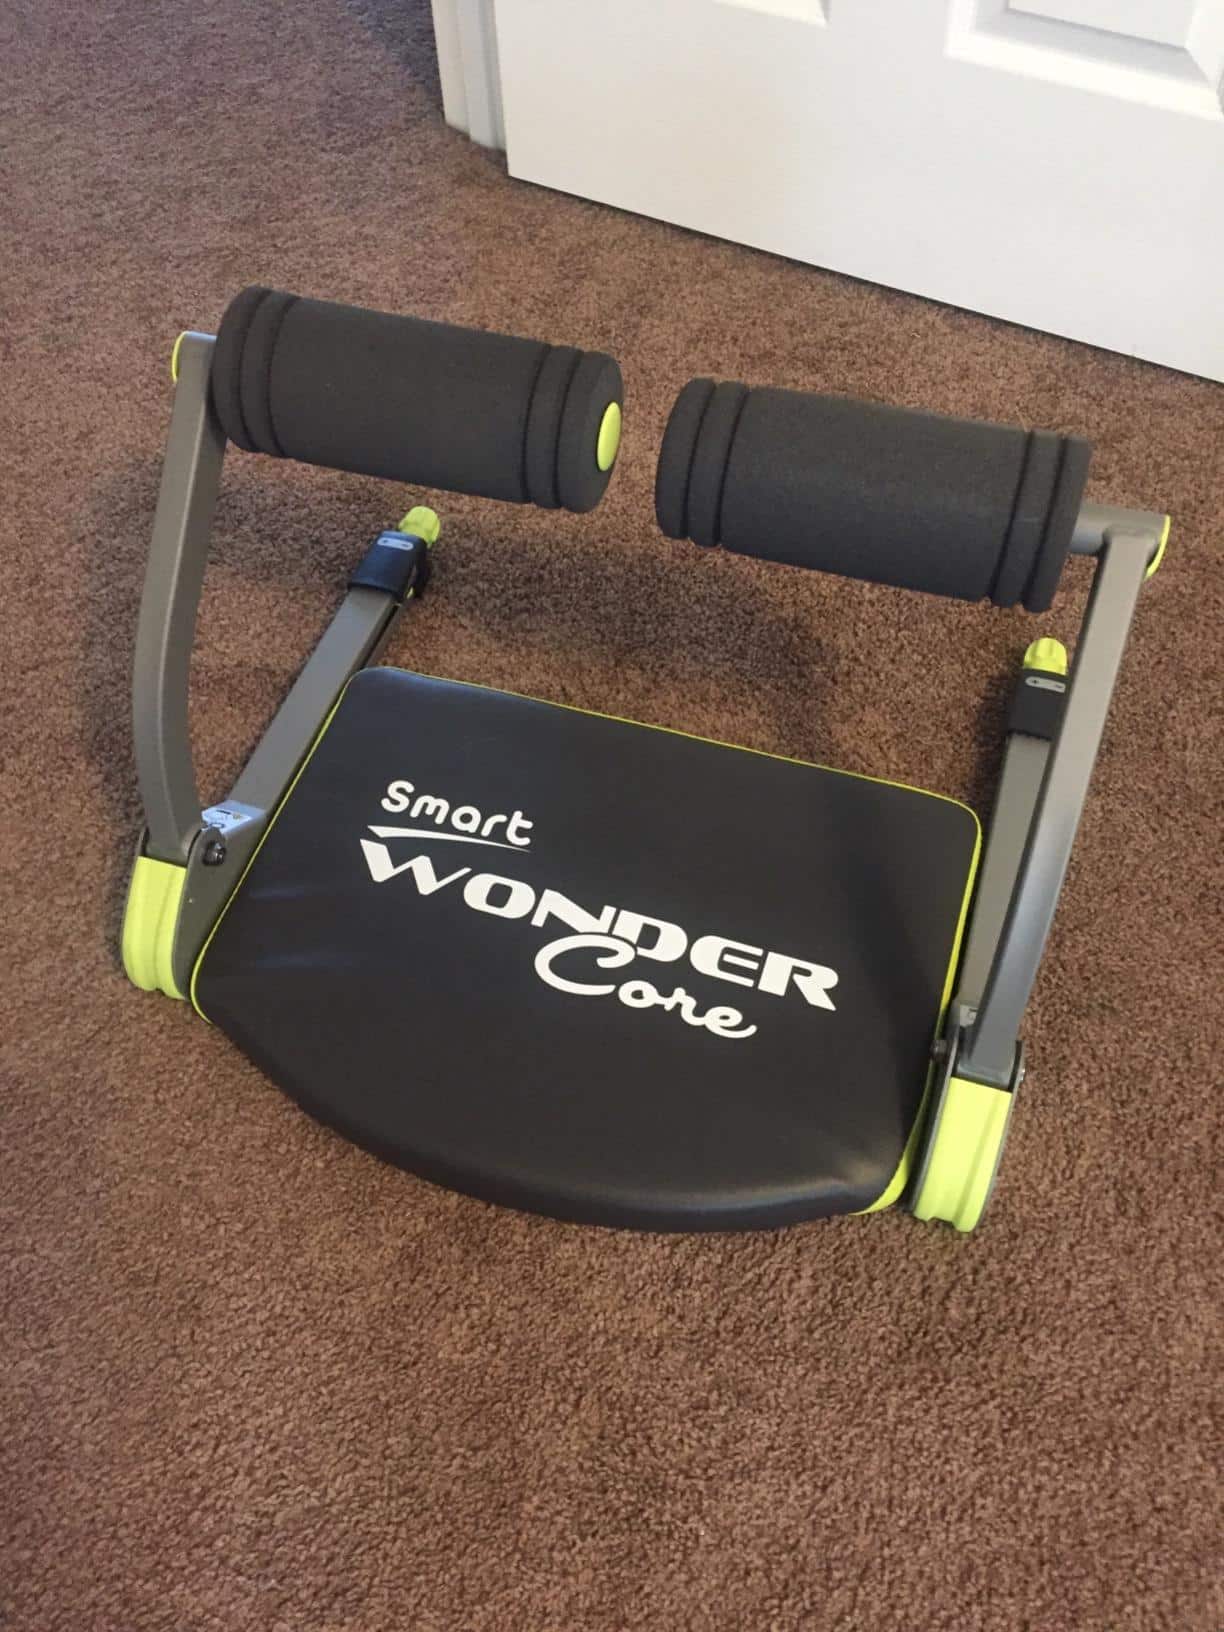 Best Compact Home Gym wonder core